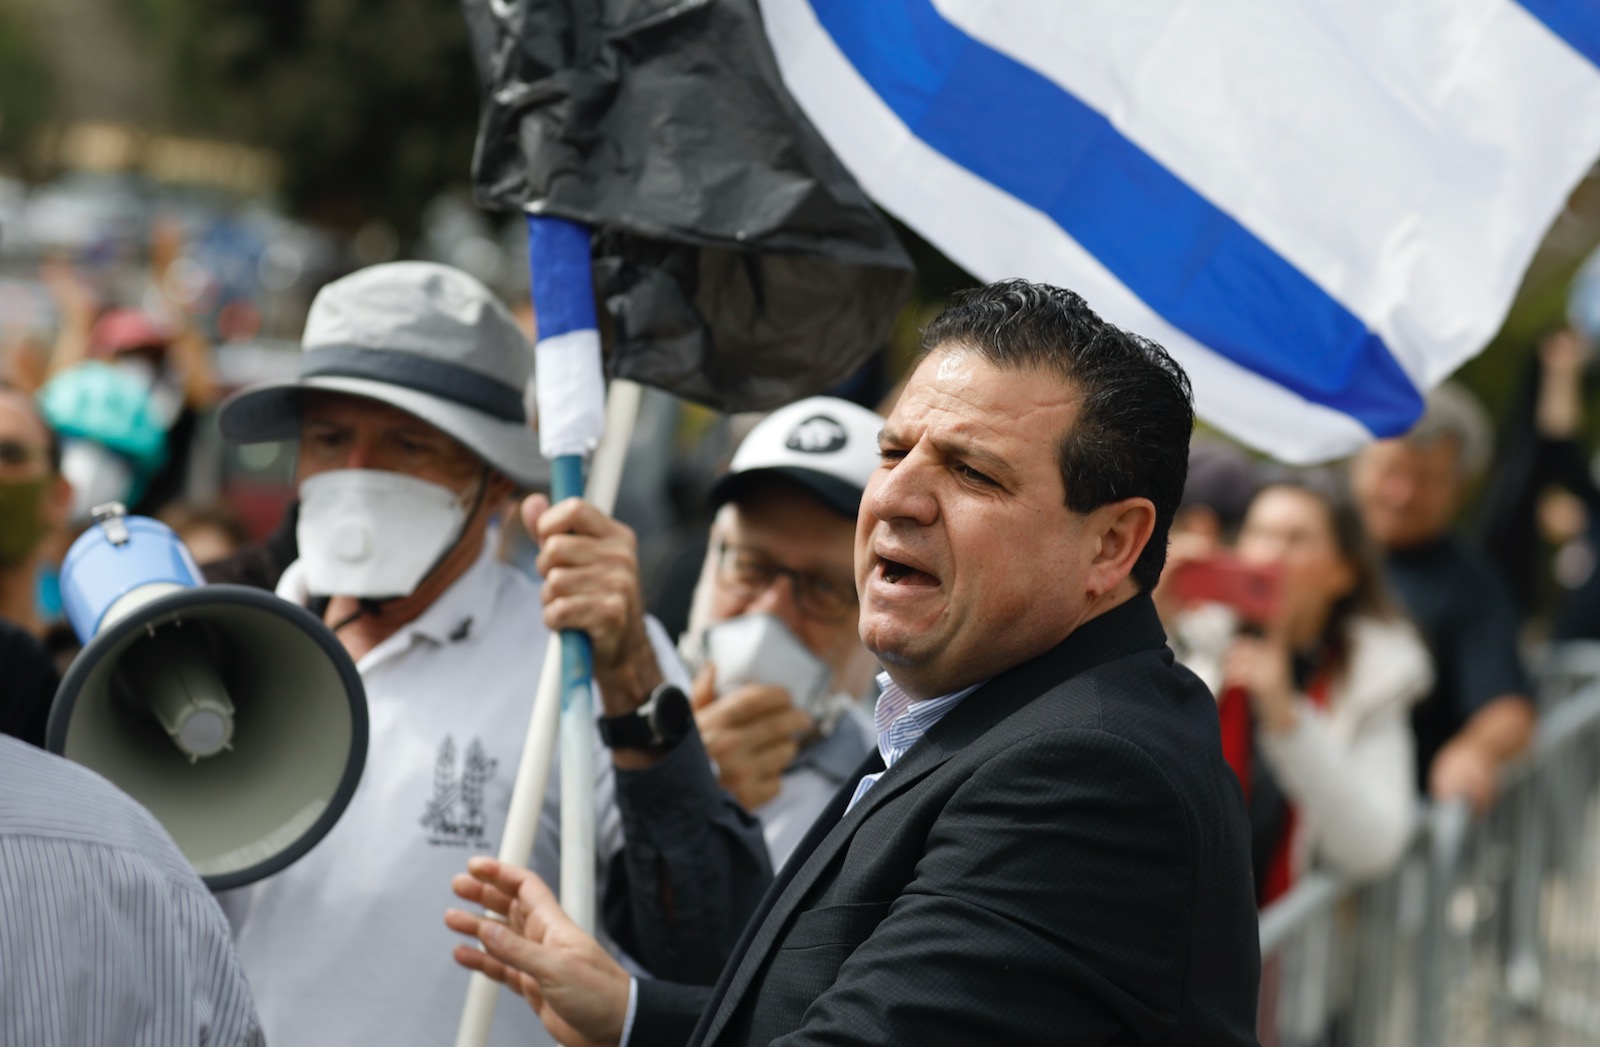 Leader of the Arab-Israeli Joint List parliamentary group Ayman Odeh attending a protest outside the Knesset in Jerusalem, Israel, March 23, 2020